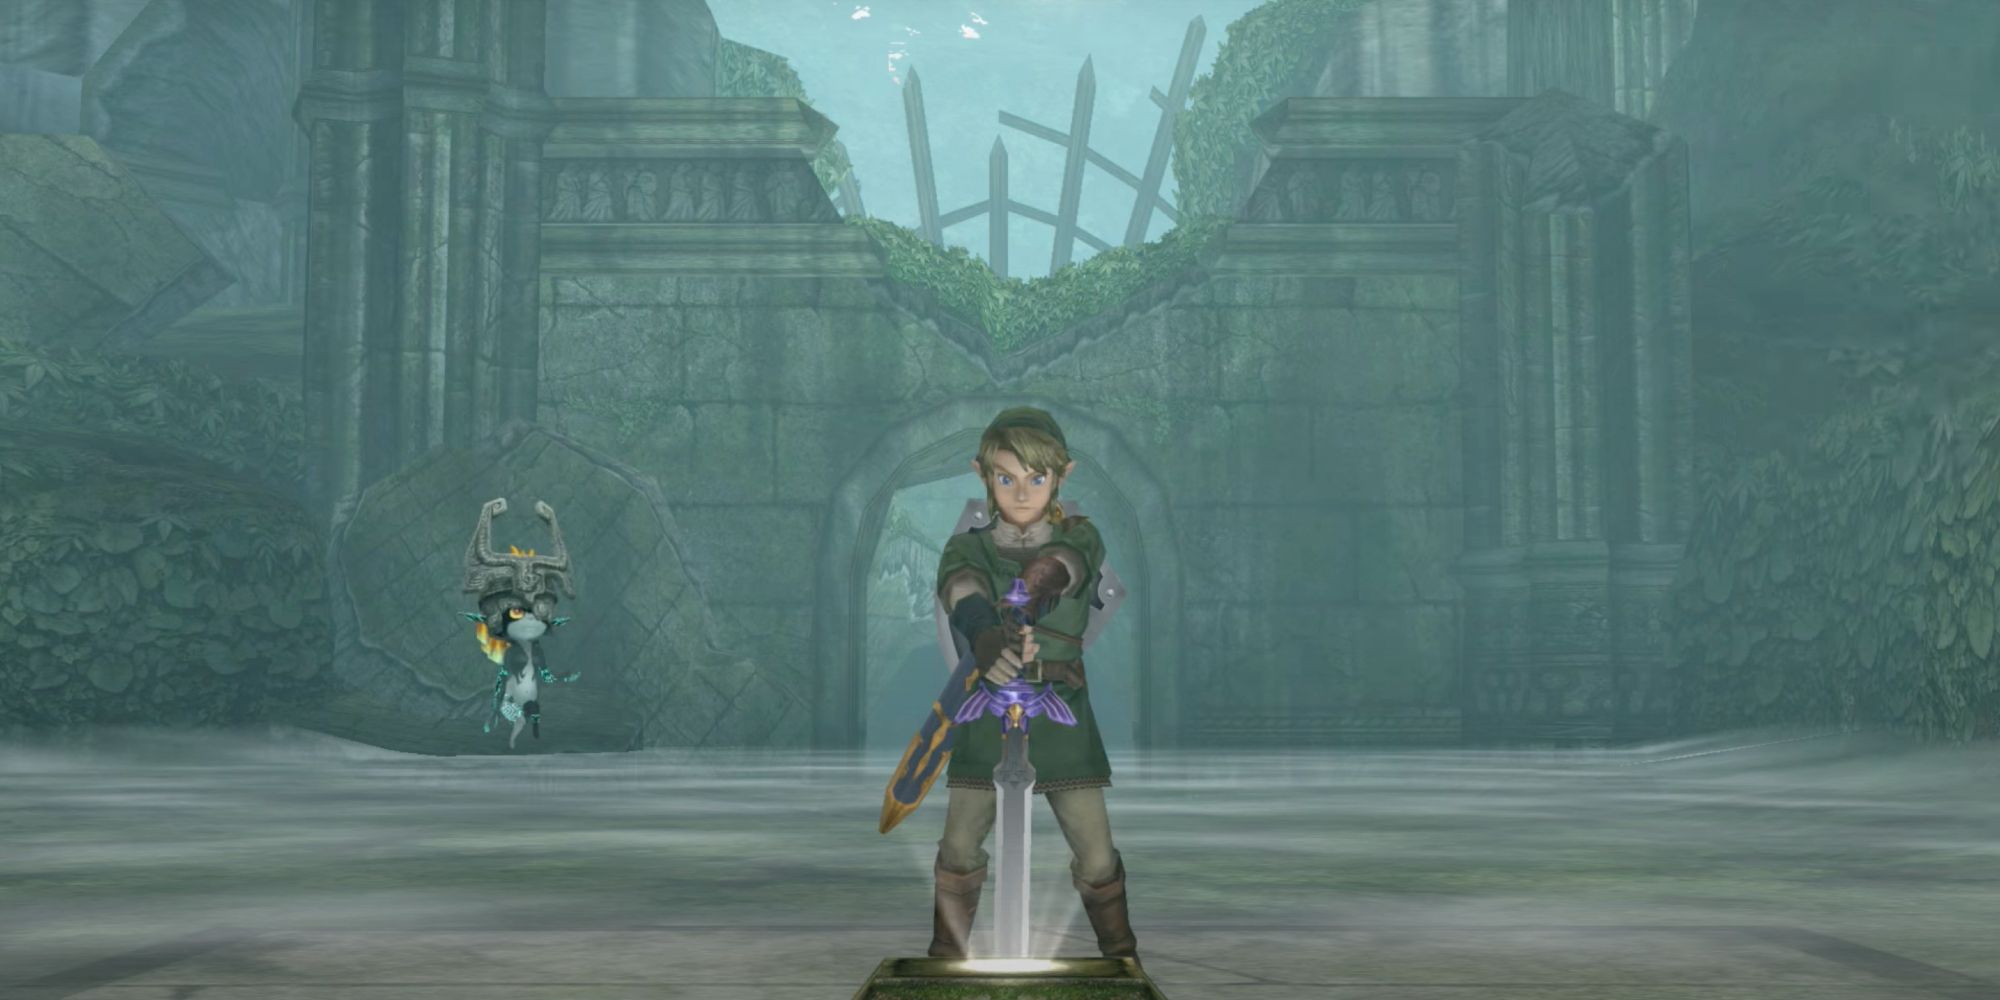 The Master Sword has perhaps the most magical qualities in Twilight Princess